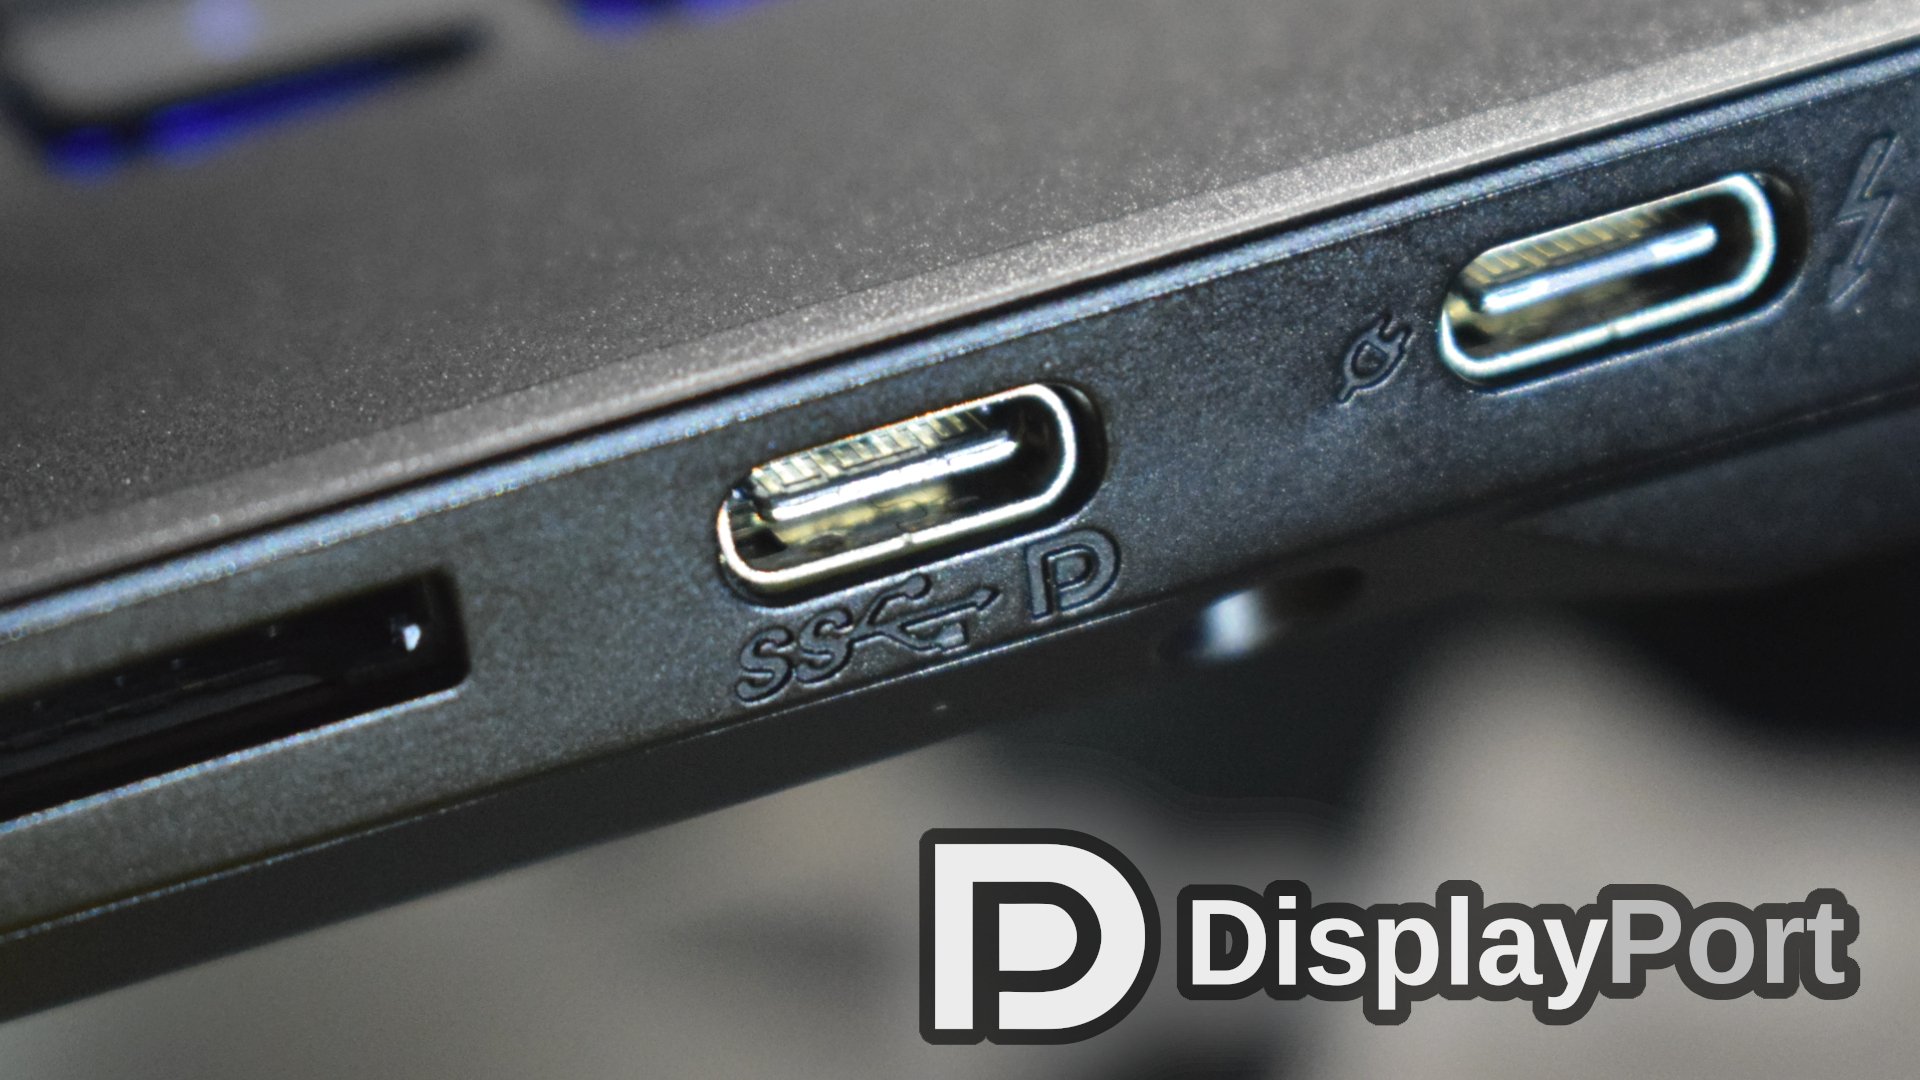 USB-C DisplayPort Alt Mode port on a laptop with the Display Port badge and name